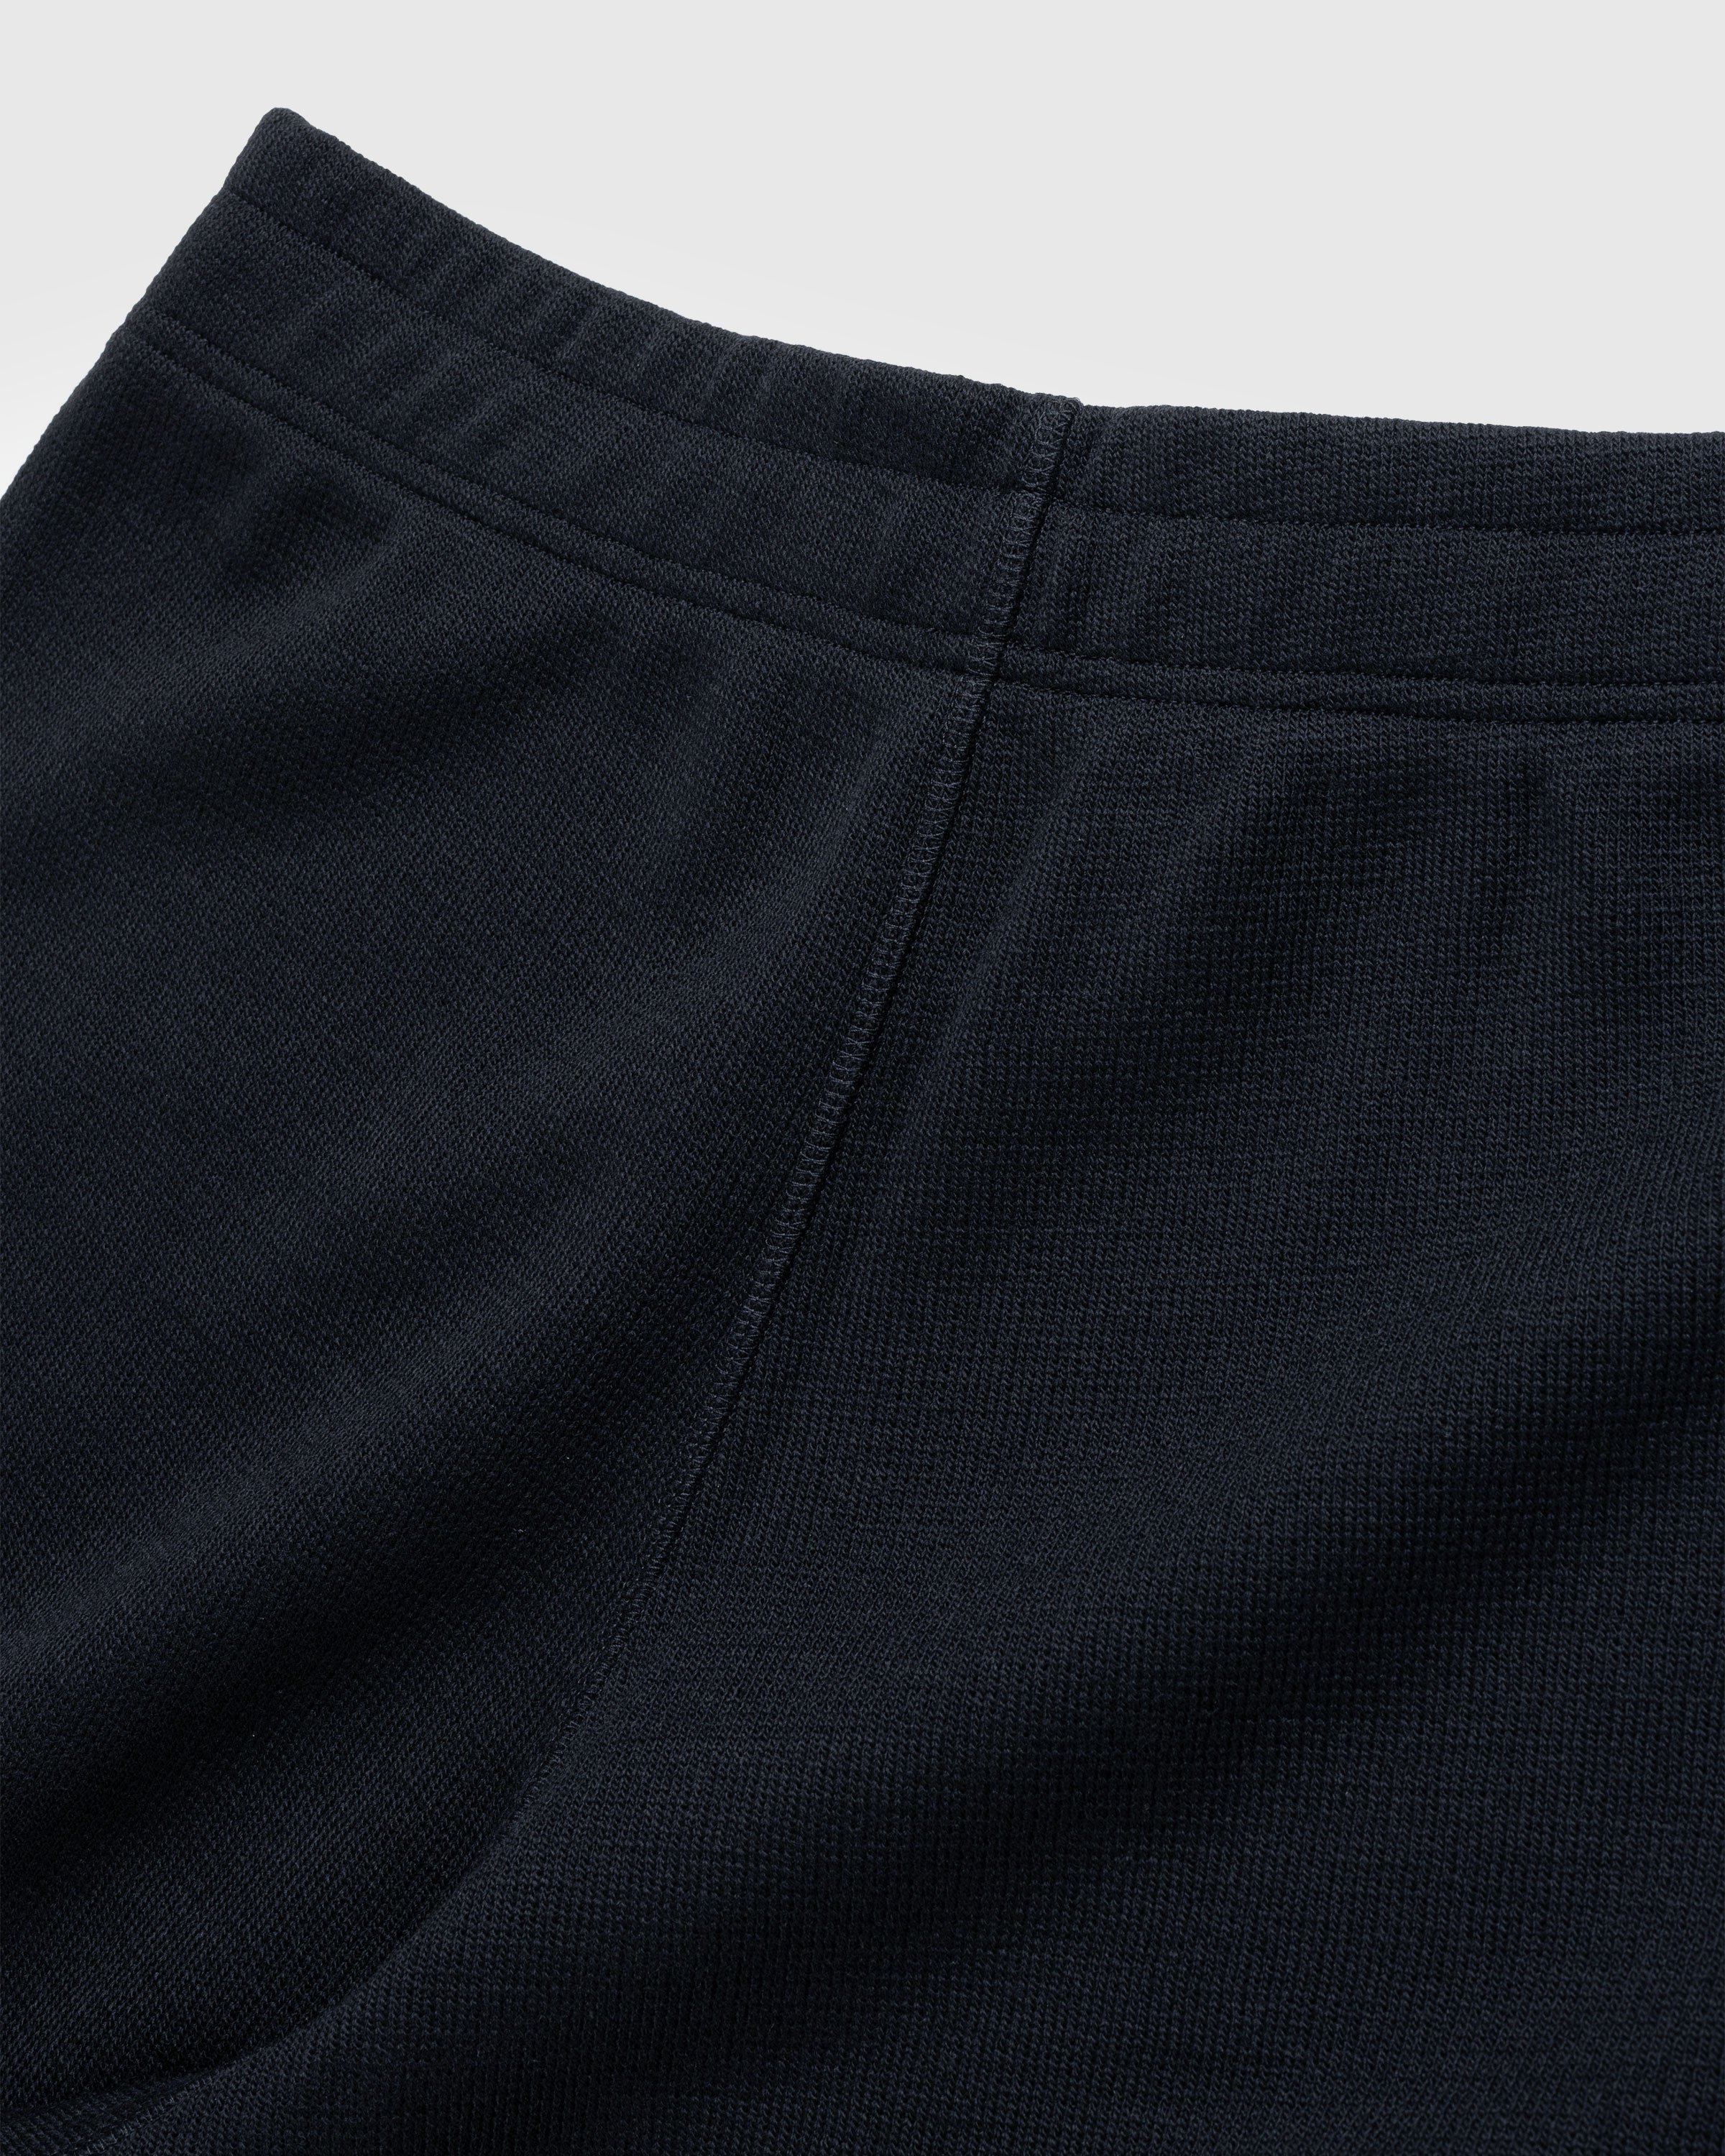 Our Legacy - REDUCED TROUSER Black - Clothing - Black - Image 7